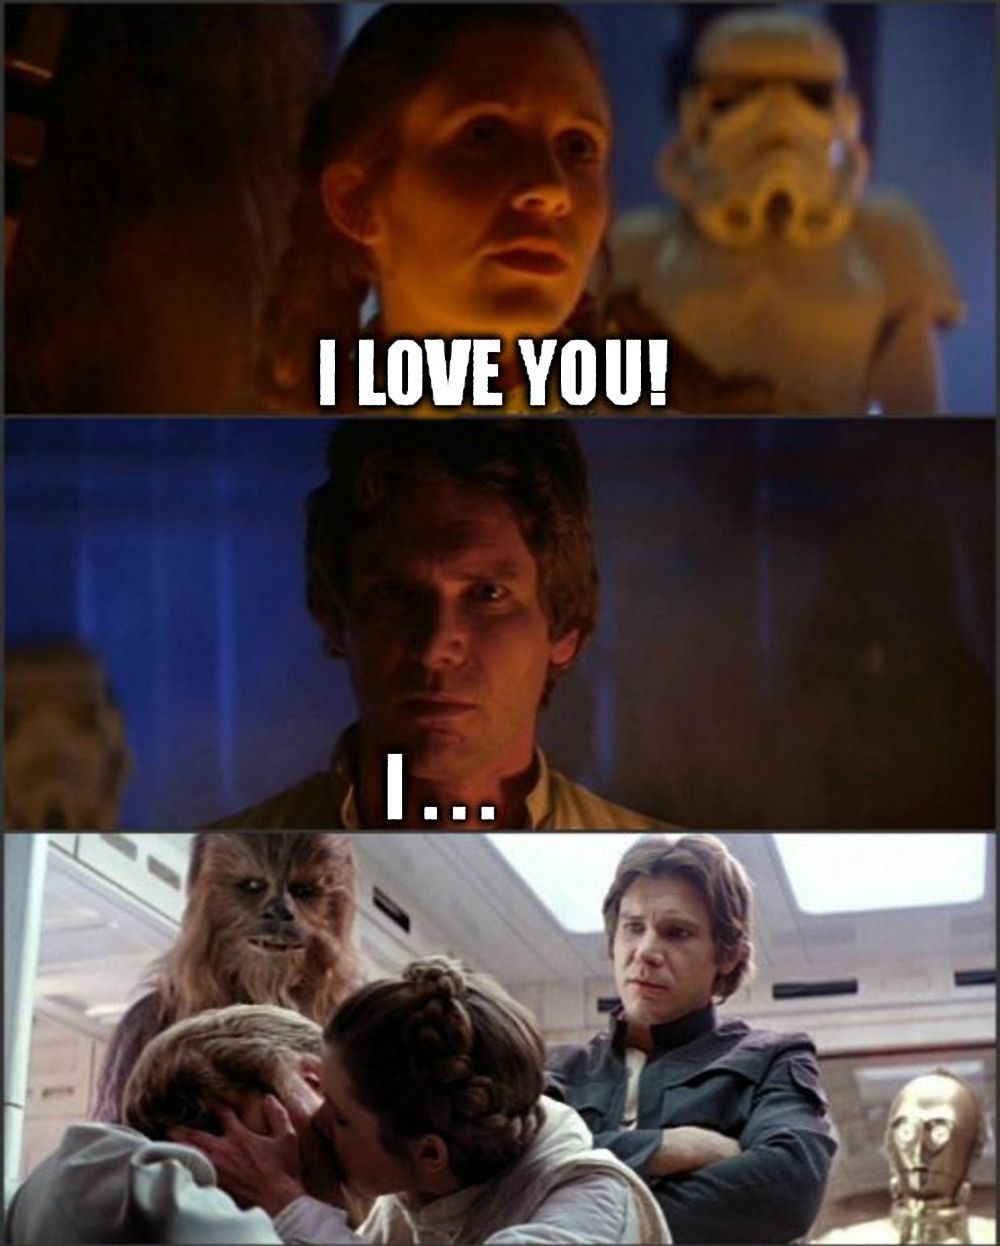 ...Episode V - The Empire Strikes Back, when he had Luke and Leia kissing a...